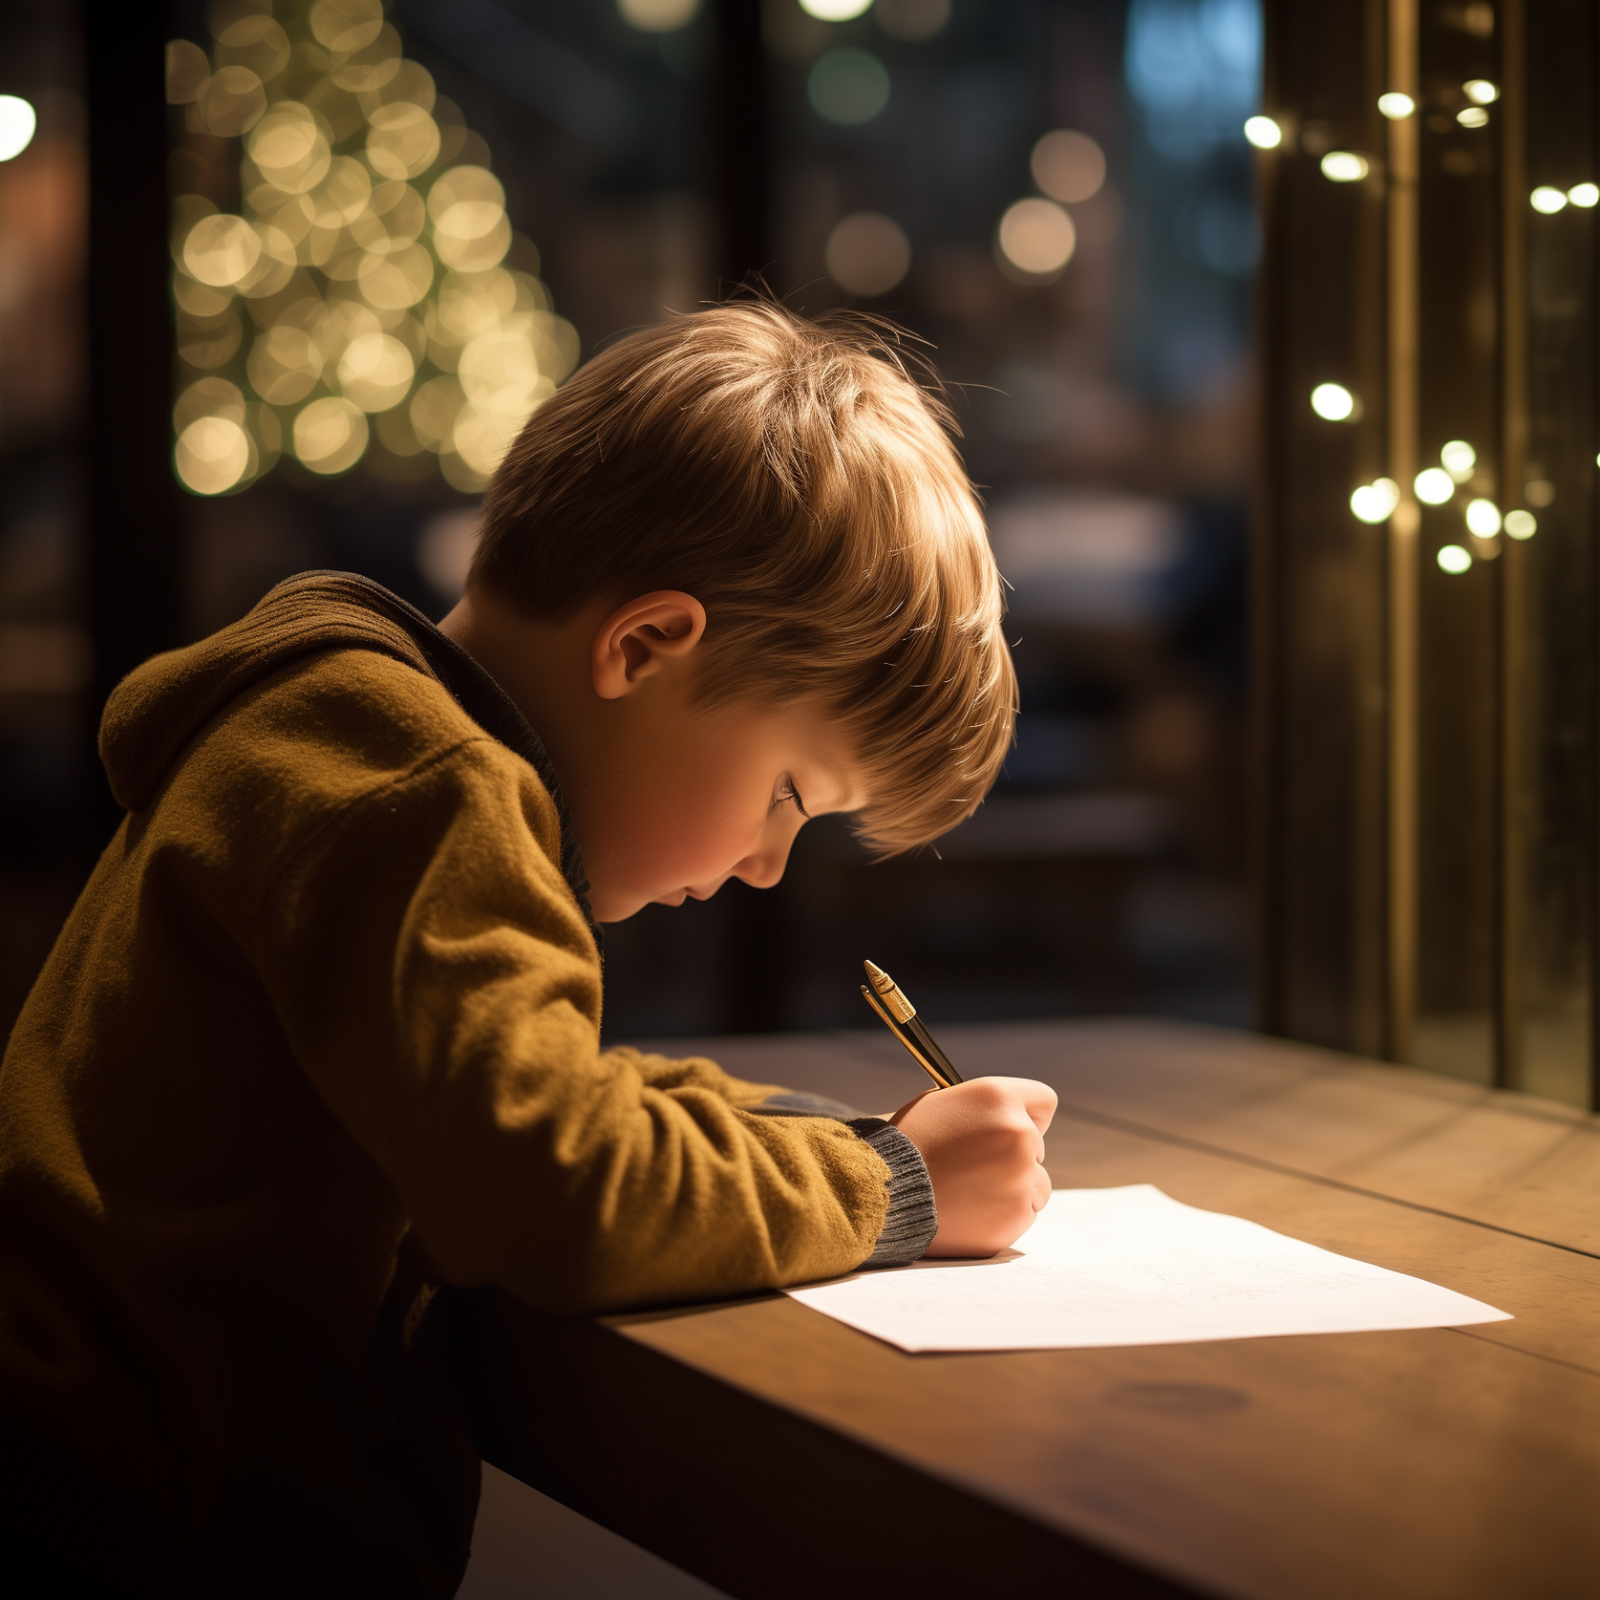 A young boy writes a letter at a desk